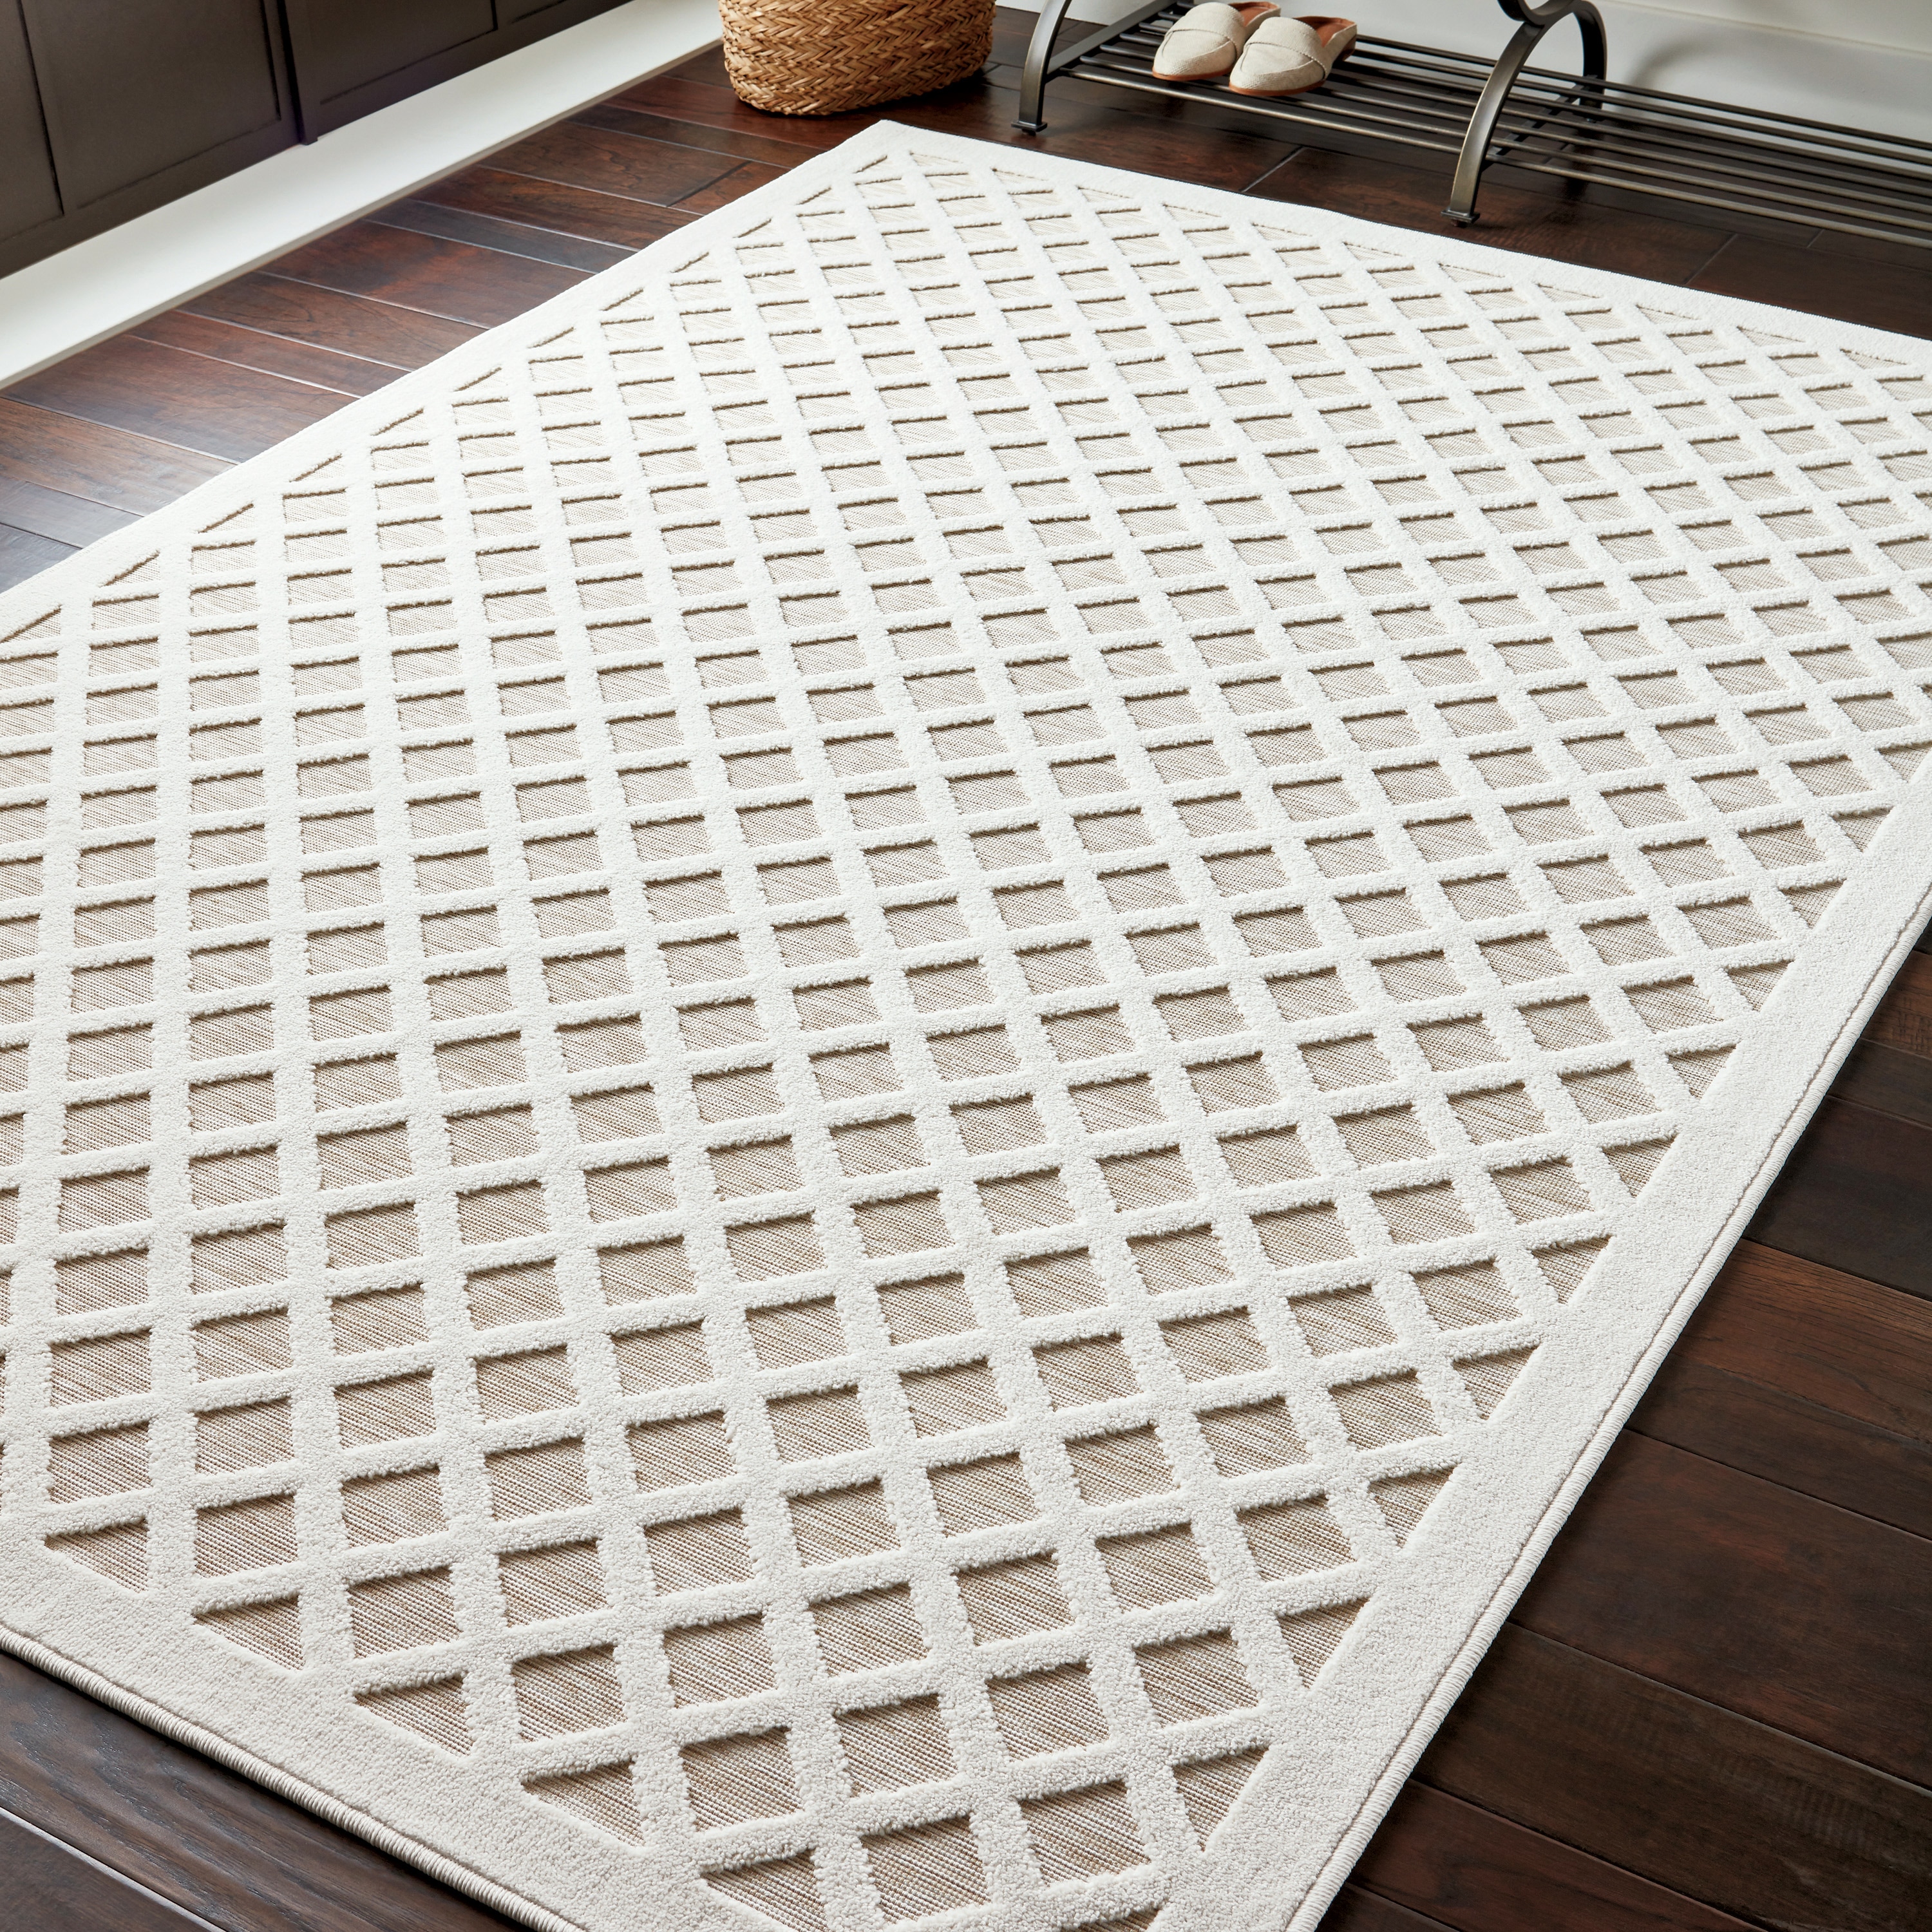 How to Choose the Best Area Rugs, Lowe's